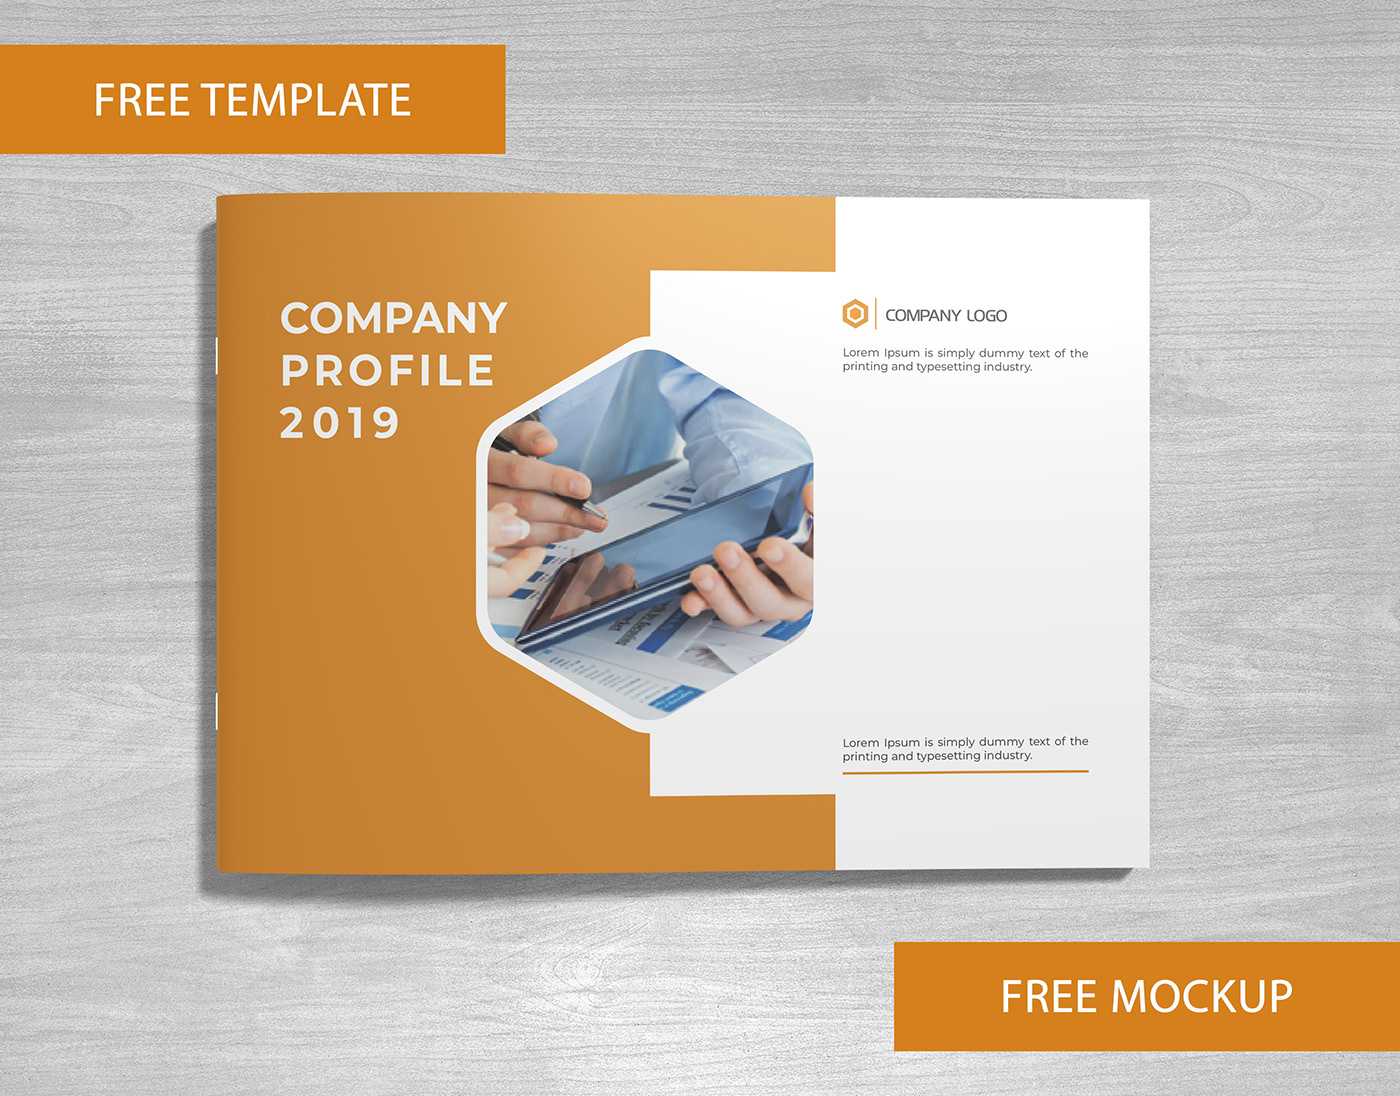 Company Profile Free Template And Mockup Download On Behance Regarding Free Illustrator Brochure Templates Download